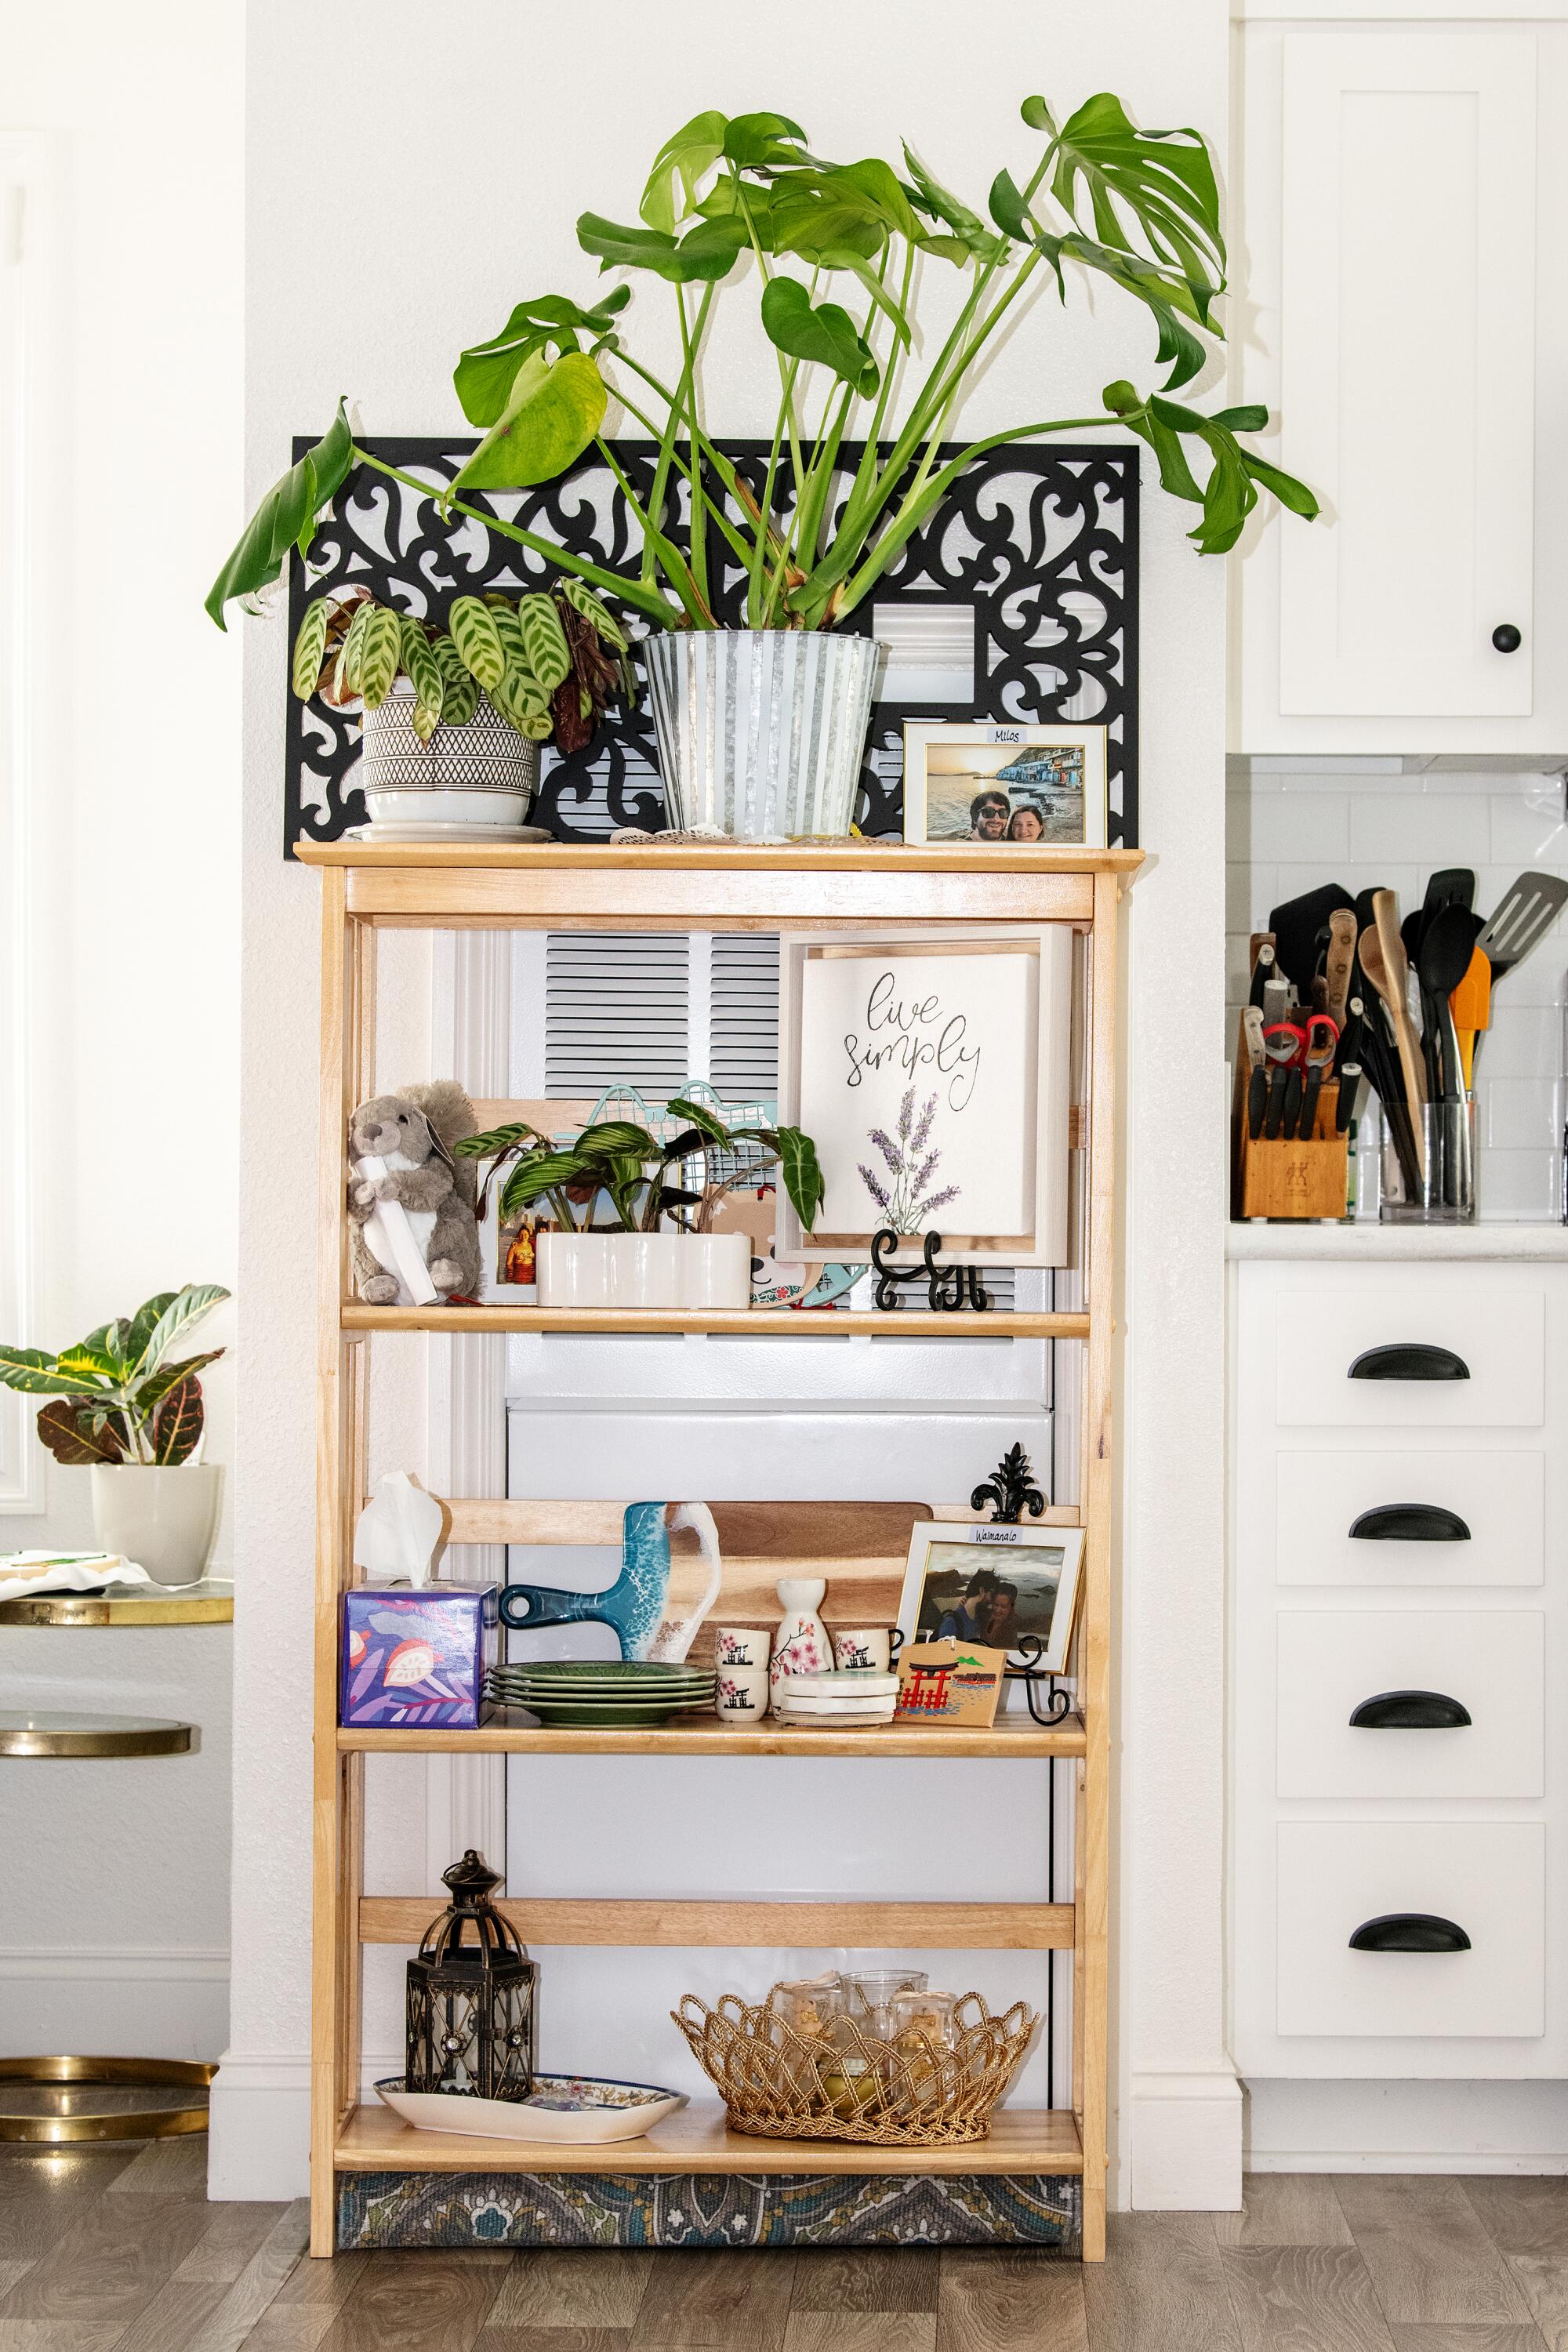 A bookshelf in a kitchen with plants 